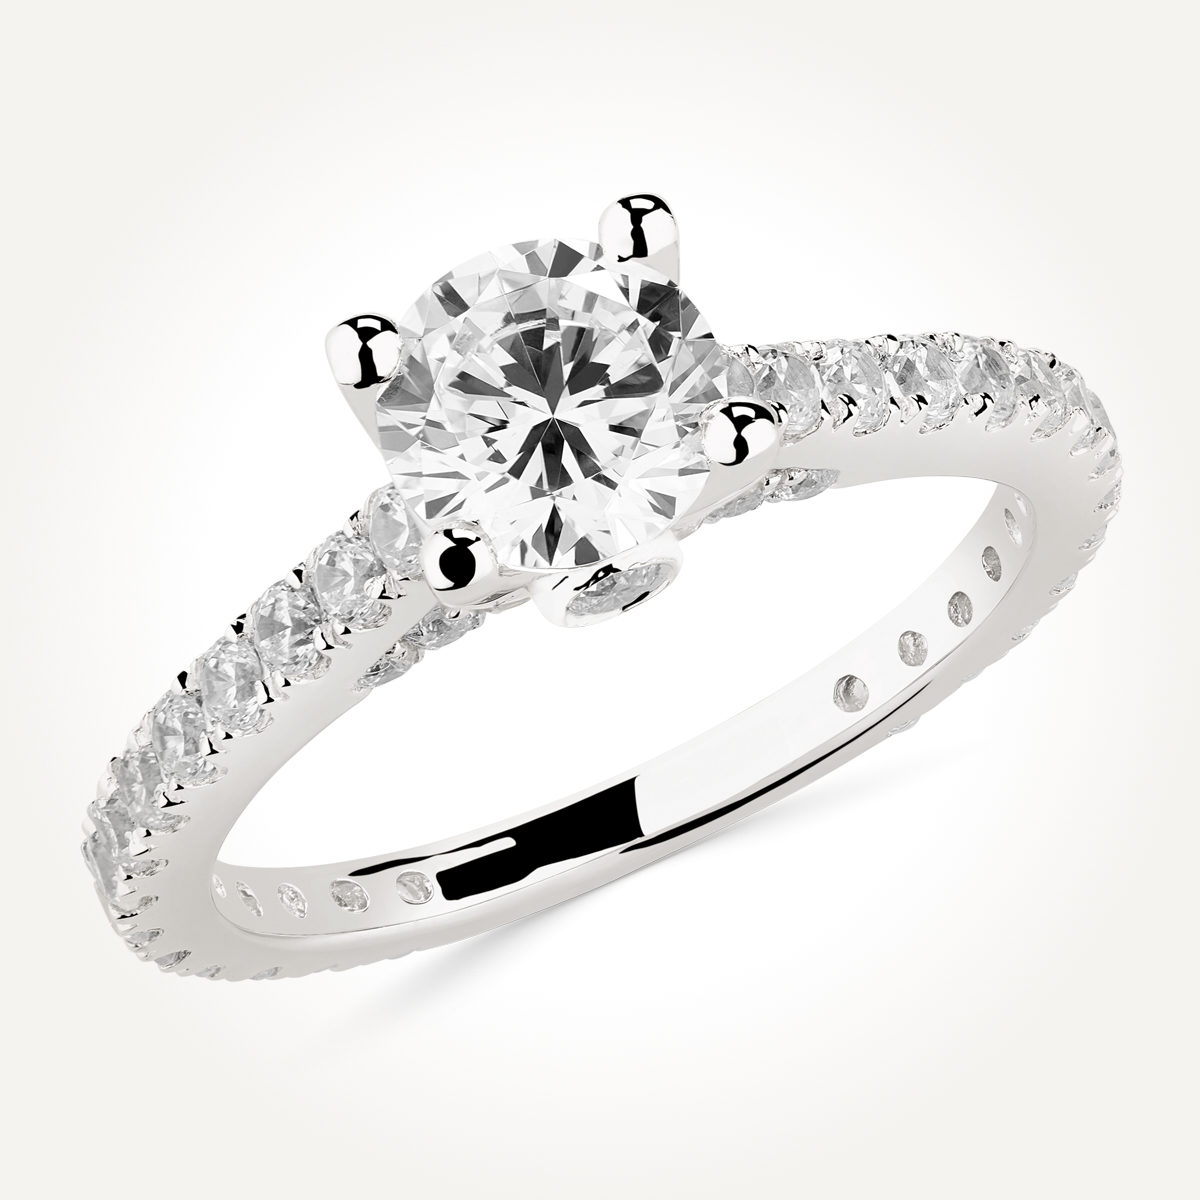 Multi Stone Engagement Ring - 7771 A